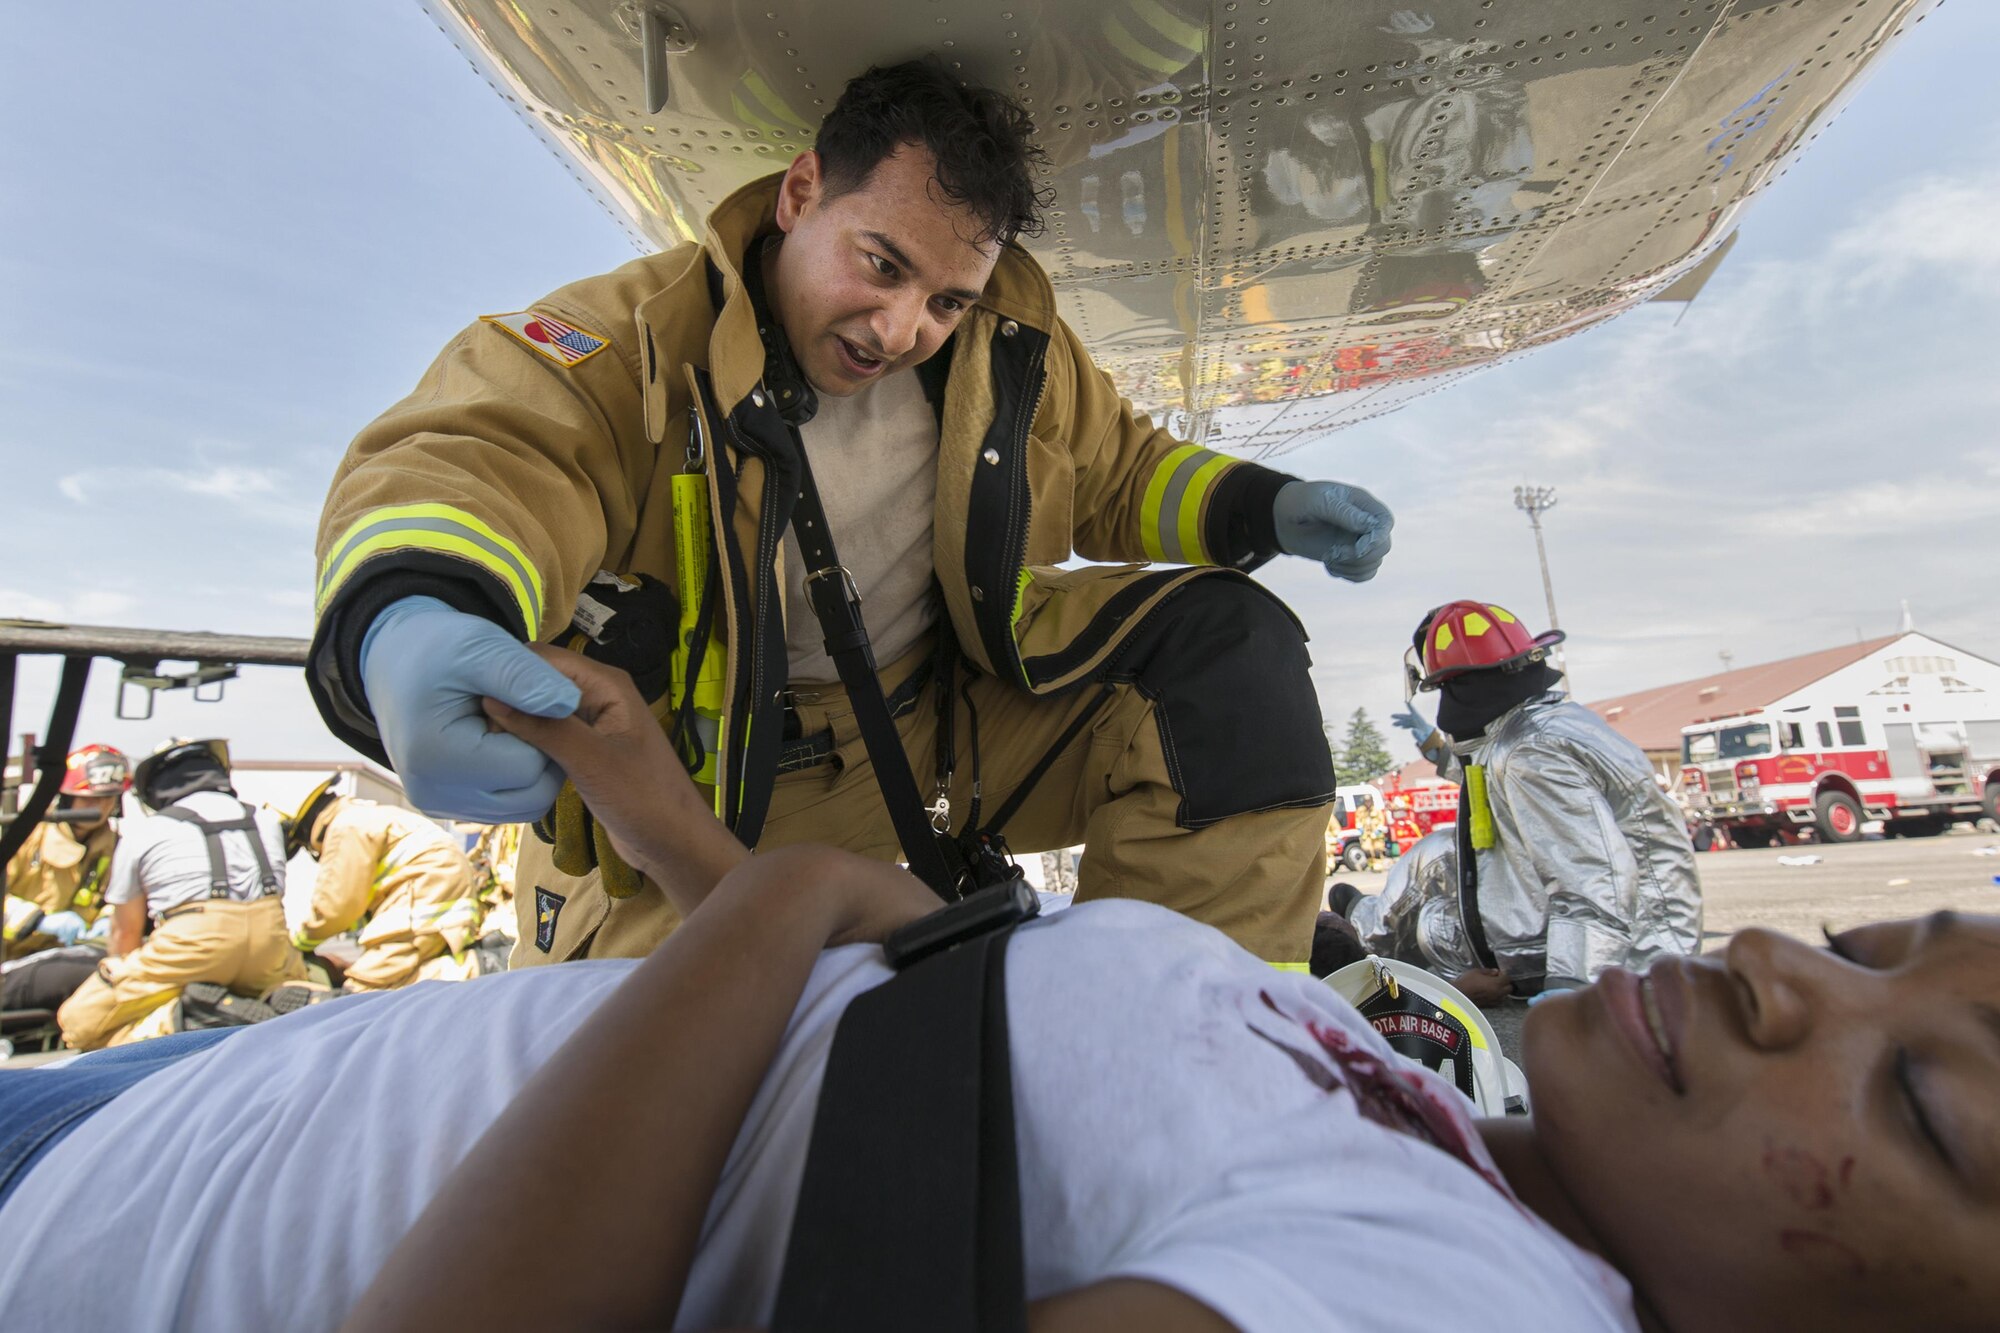 U.S. Air Force Tech. Sgt. Stephen Sanabria, 374th Civil Engineer Squadron fire fighter, checks the vitals of a simulated victim during an Emergency Management Exercise, July 13, 2015. The EME trained Yokota for possible real-world situations requiring response and communication between on-base organizations. (U.S. Air Force photo by Osakabe Yasuo/Released)
